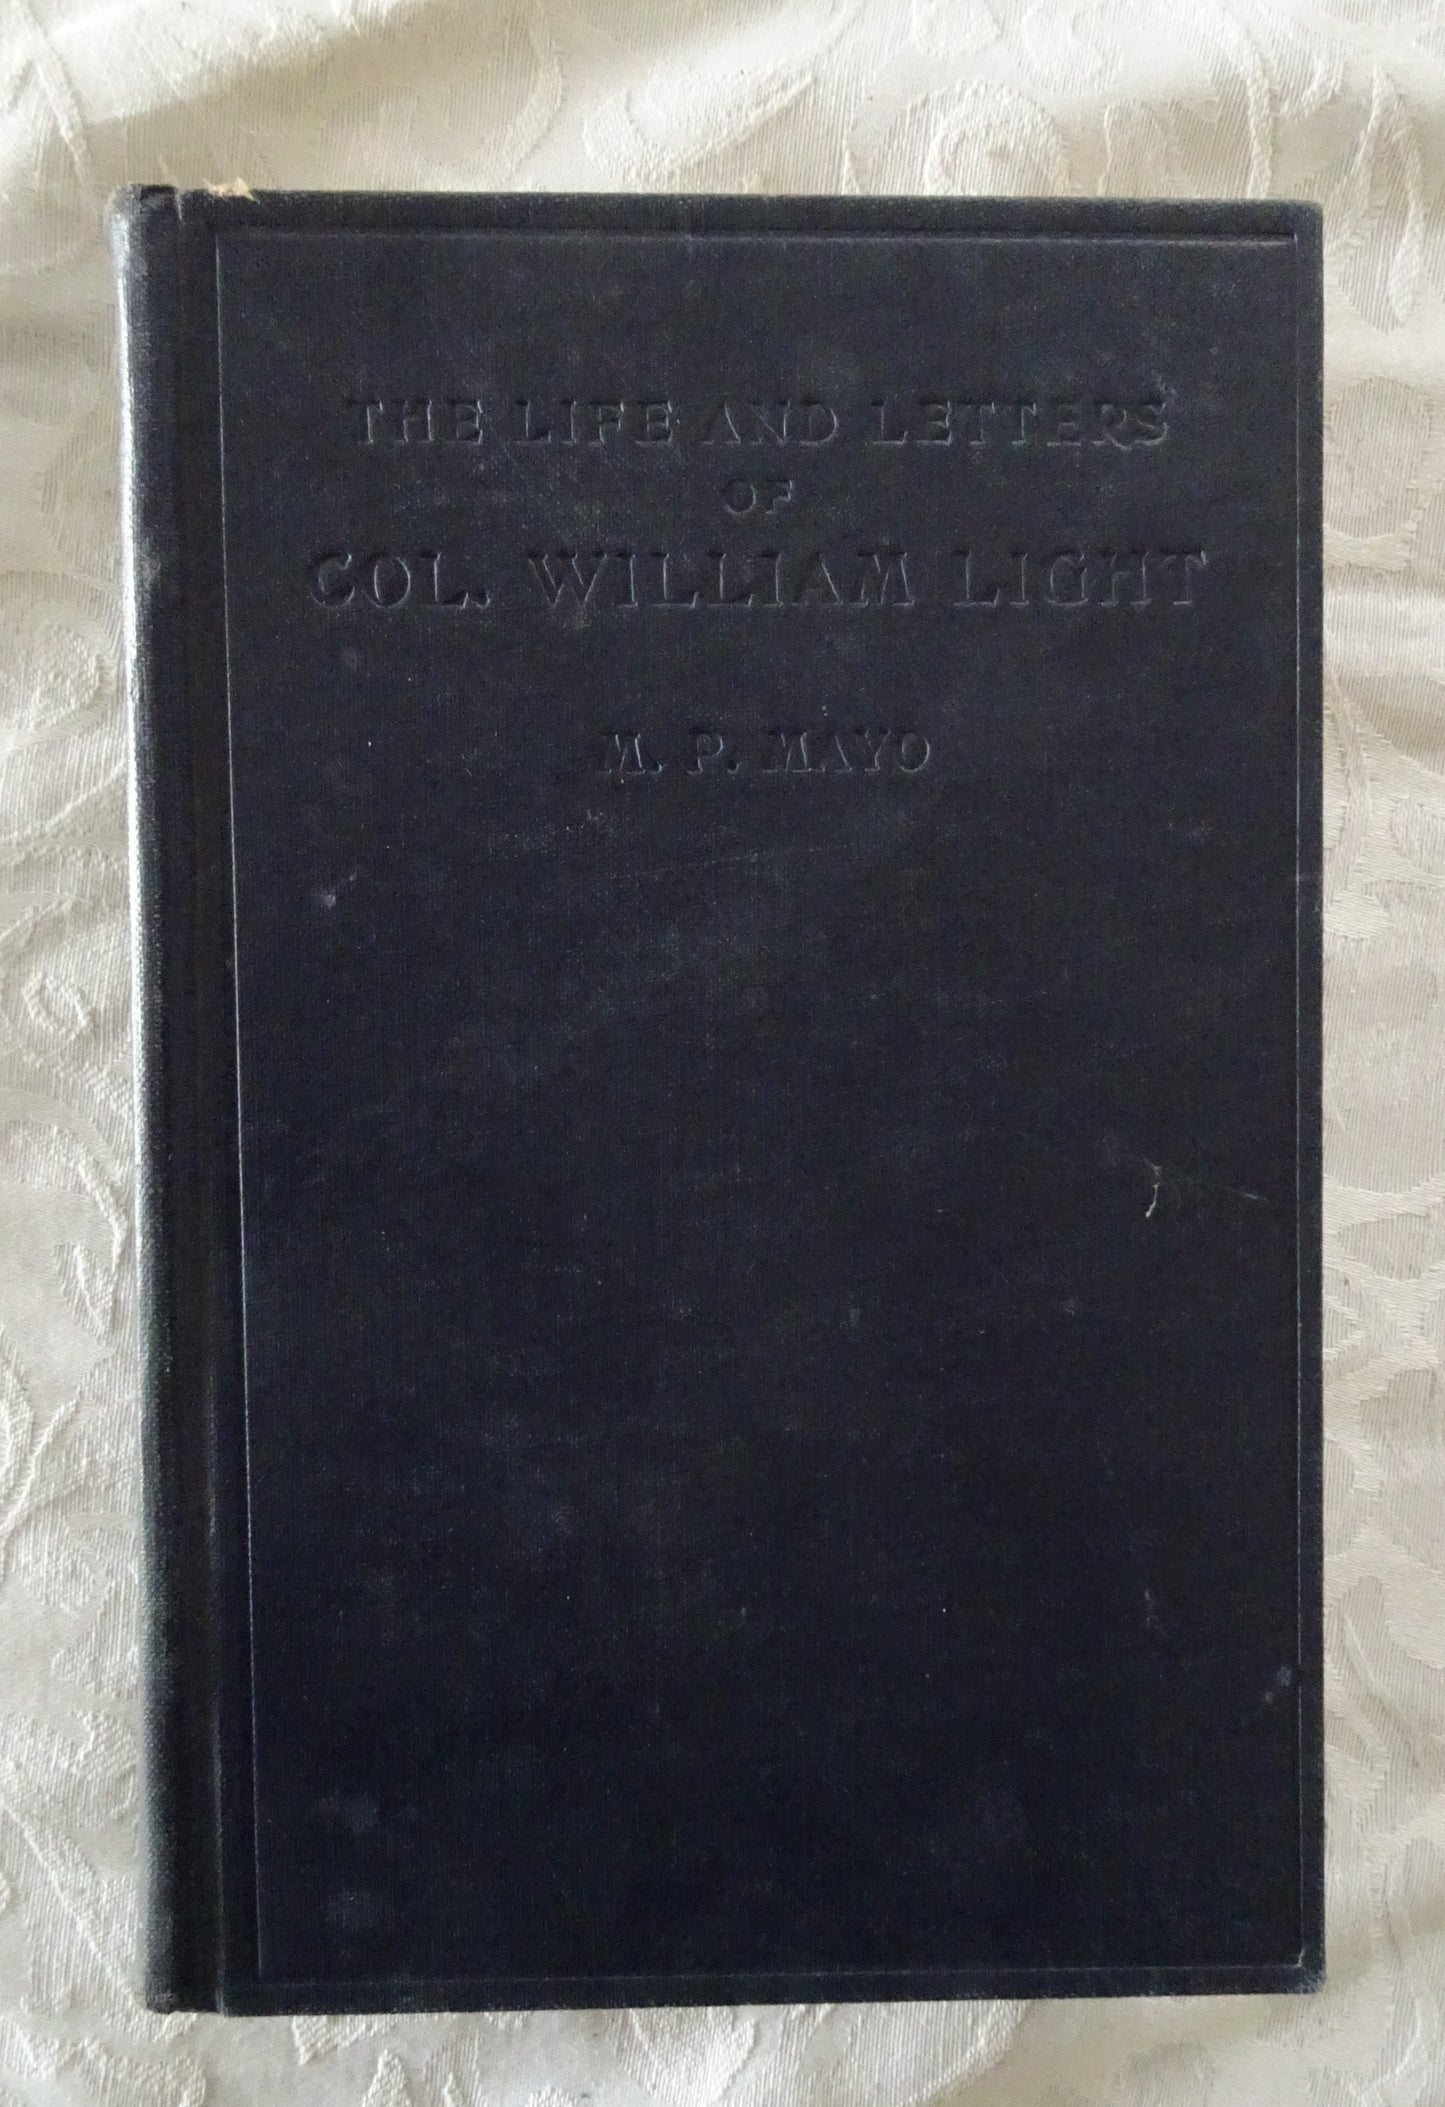 The Life and Letters of Col. William Light by M. P. Mayo